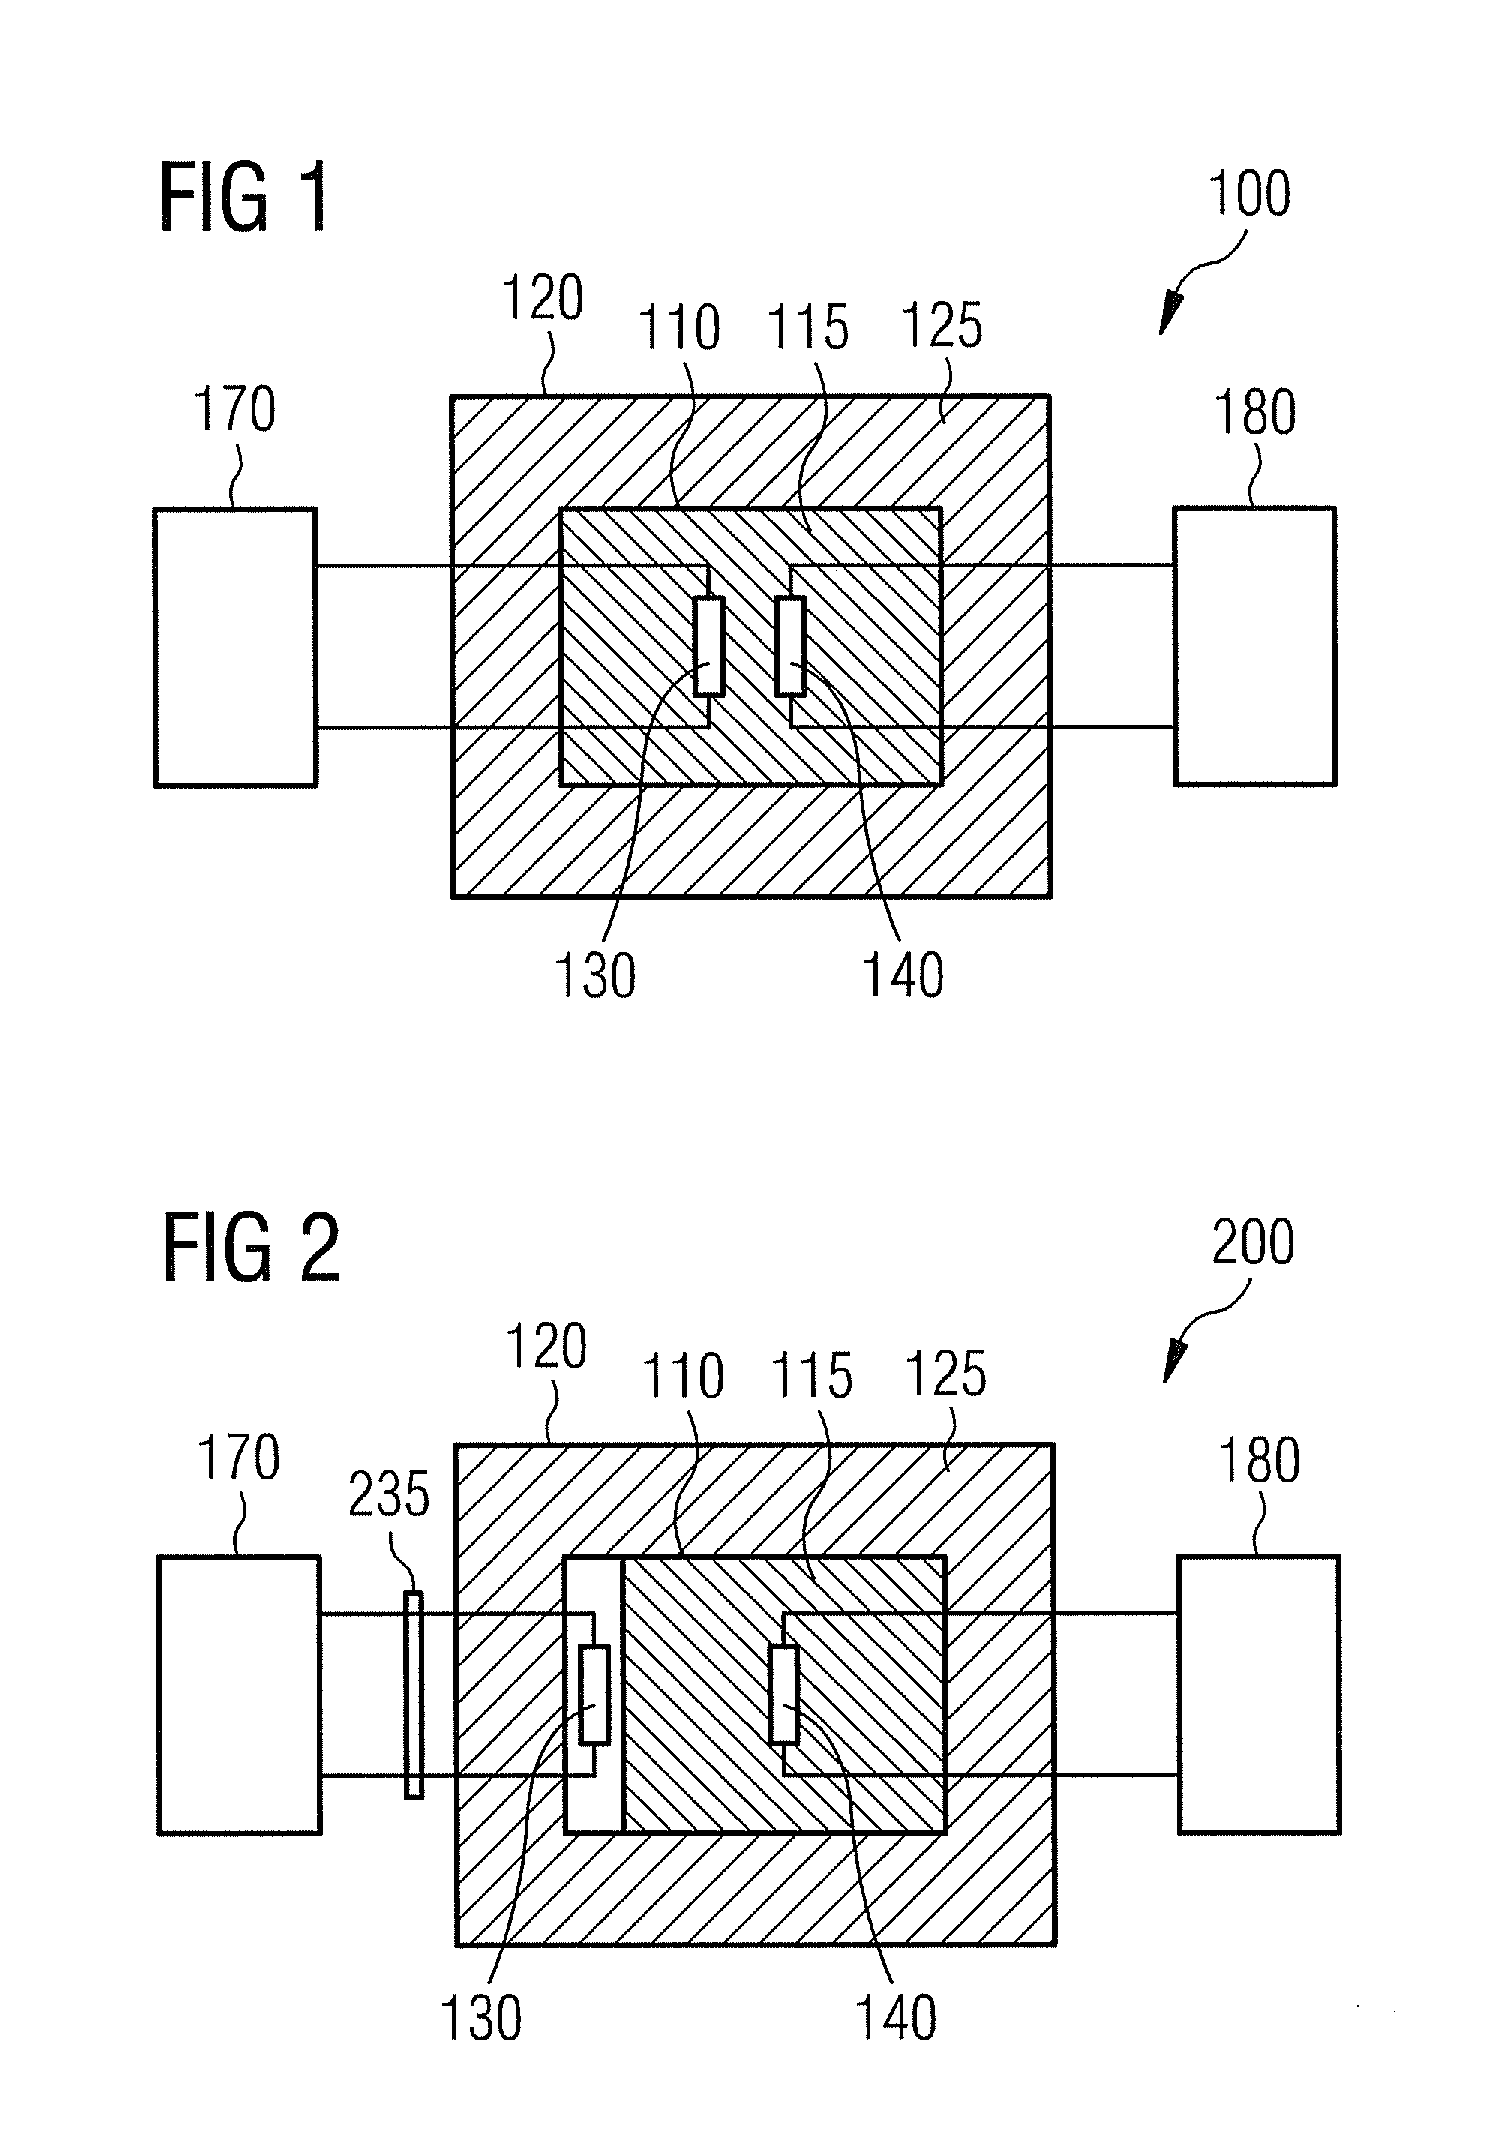 Energy transfer system comprising a phase change material